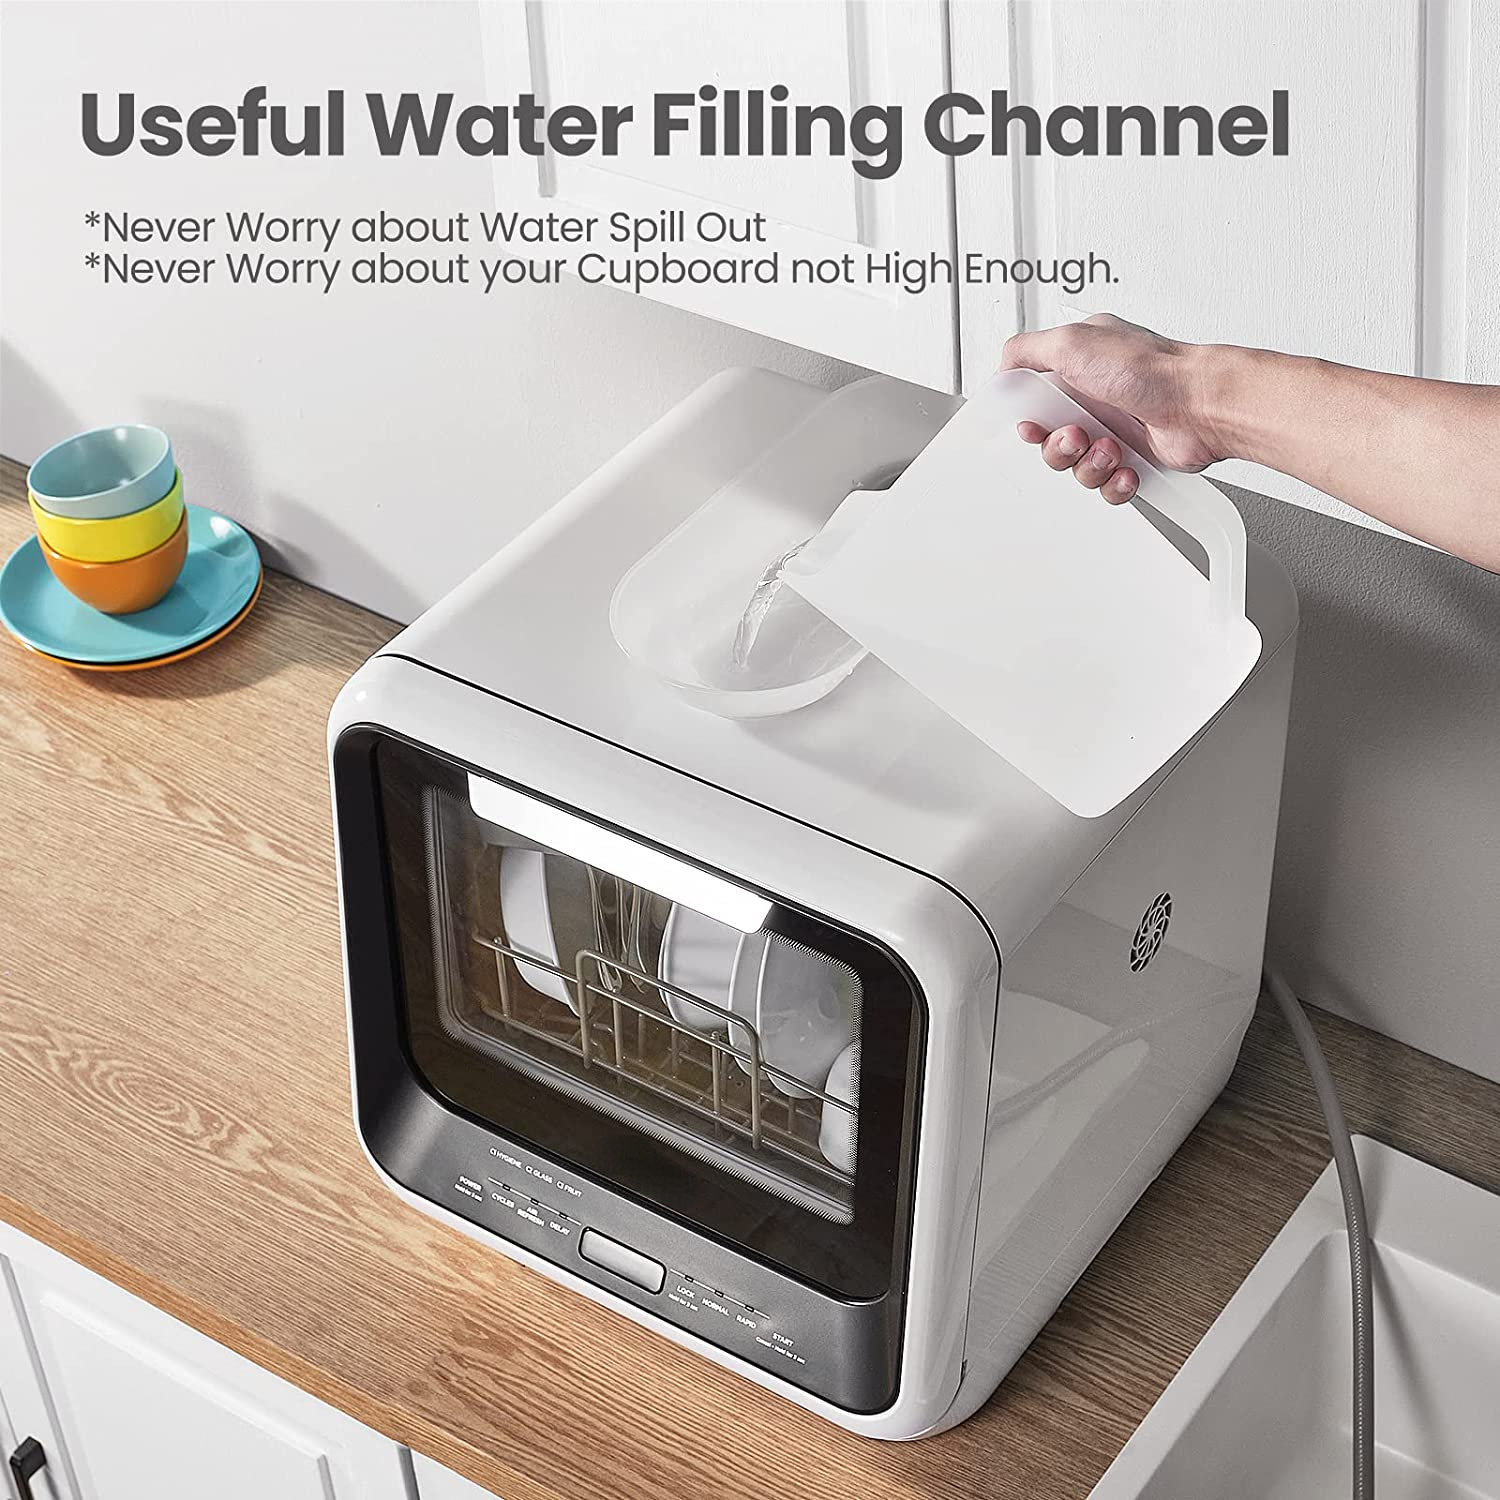 Comfee' Portable Dishwasher Countertop with 5L Built-In Water Tank, No Hookup Needed, 6 Programs, 360° Dual Spray, 192°F High-Temp& Air-Dry Function